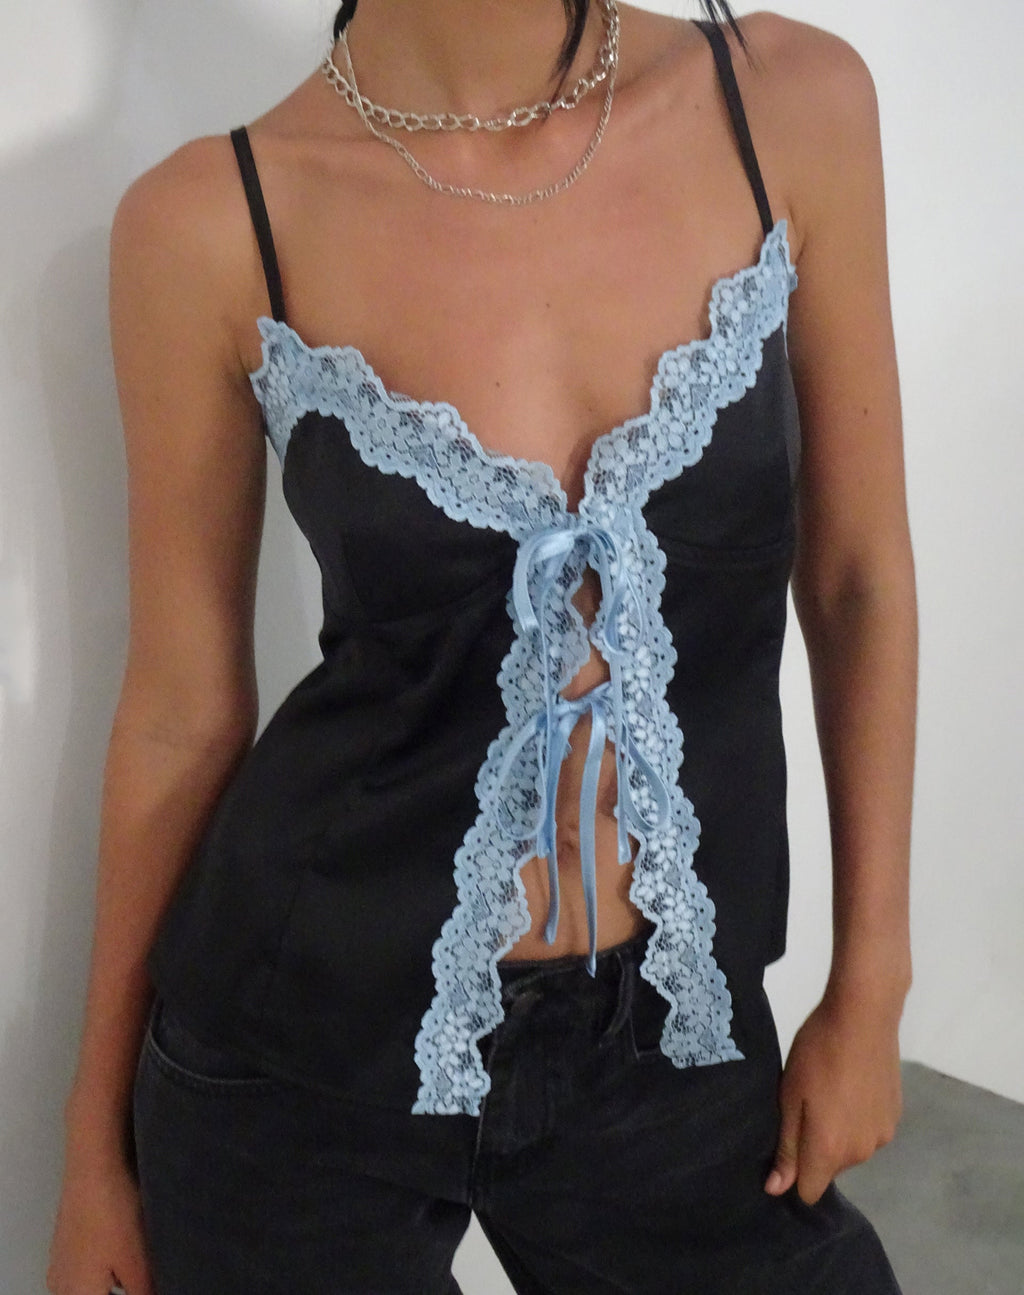 Bahela Tie Front Cami Top in Black with Blue Lace